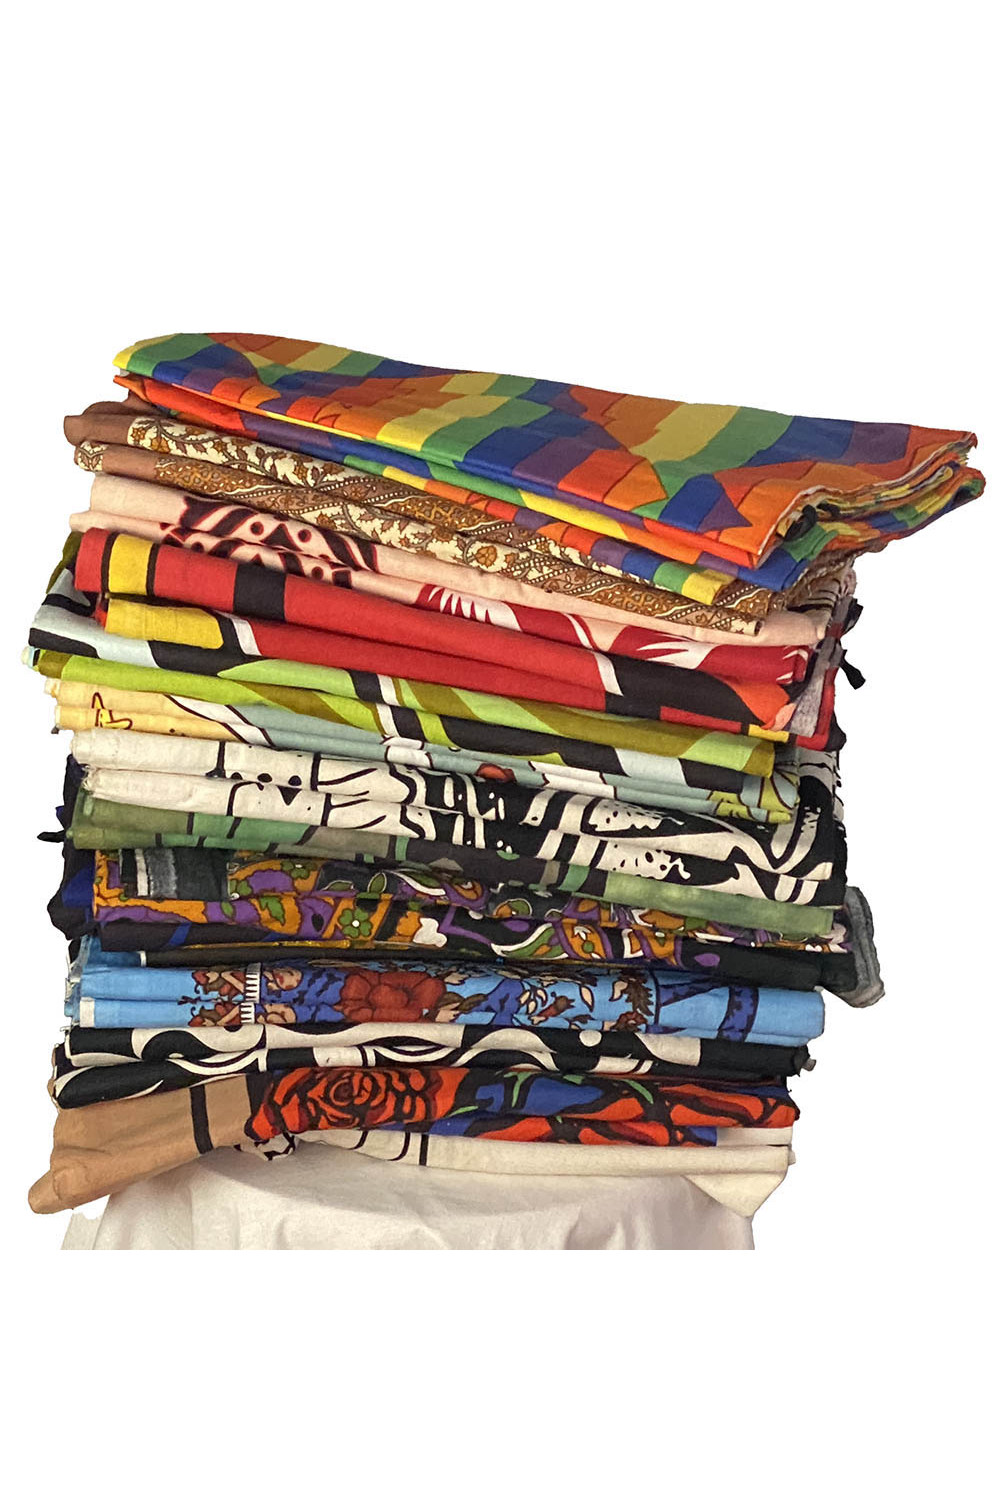 WHOLESALE LOT of 30 Assorted Crafter Quality Tapestries (Contains Print and Fabric Imperfections) -SAVE OVER 50%